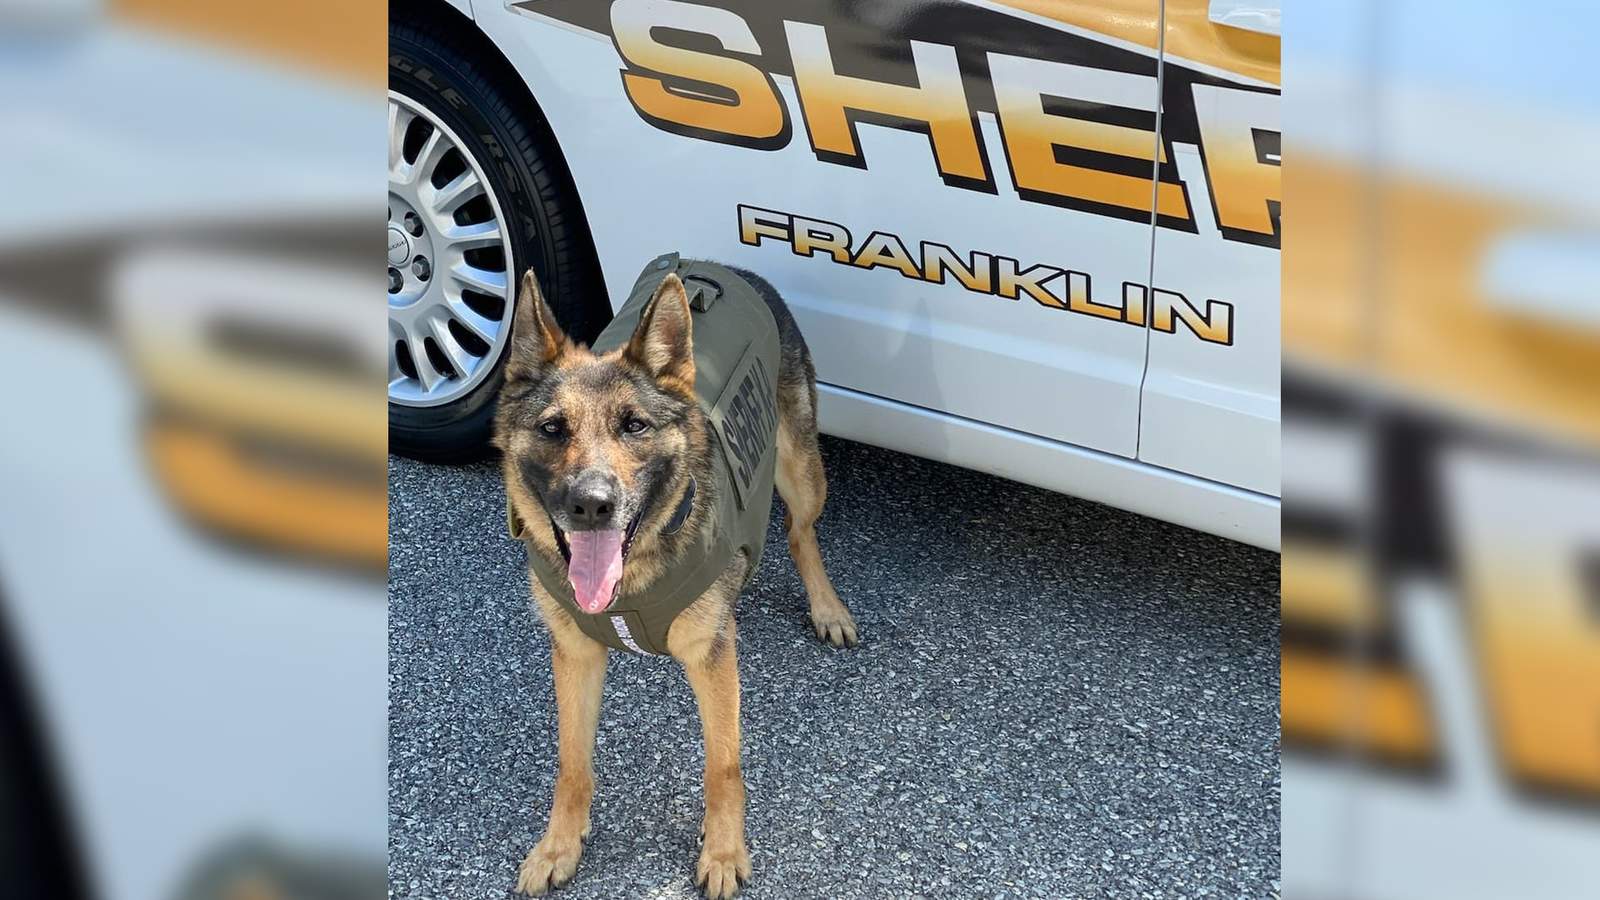 Franklin County K9 gets new body armor thanks to donation